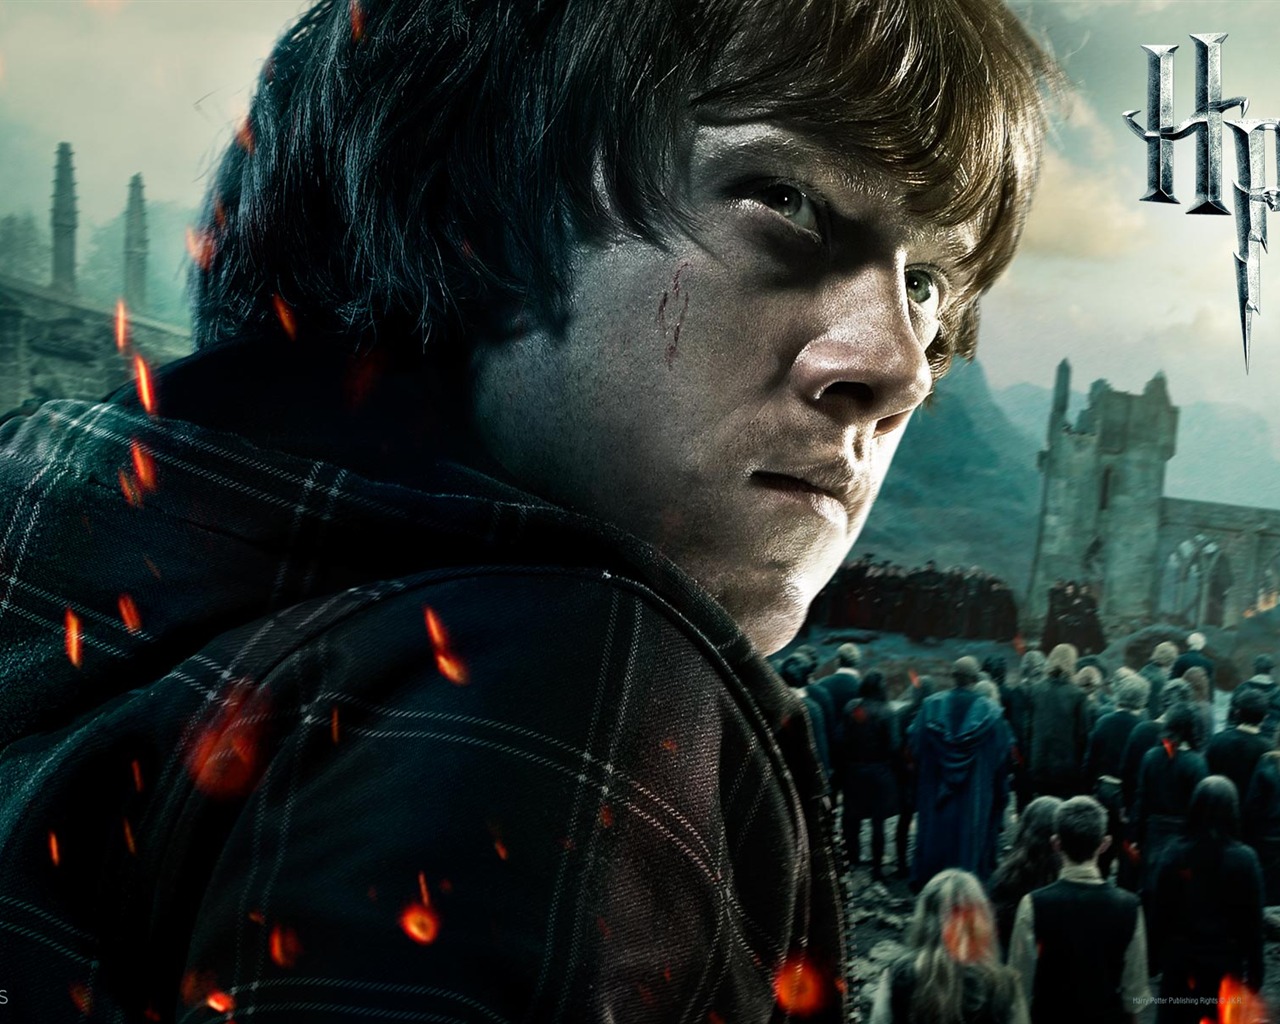 2011 Harry Potter and the Deathly Hallows HD wallpapers #14 - 1280x1024